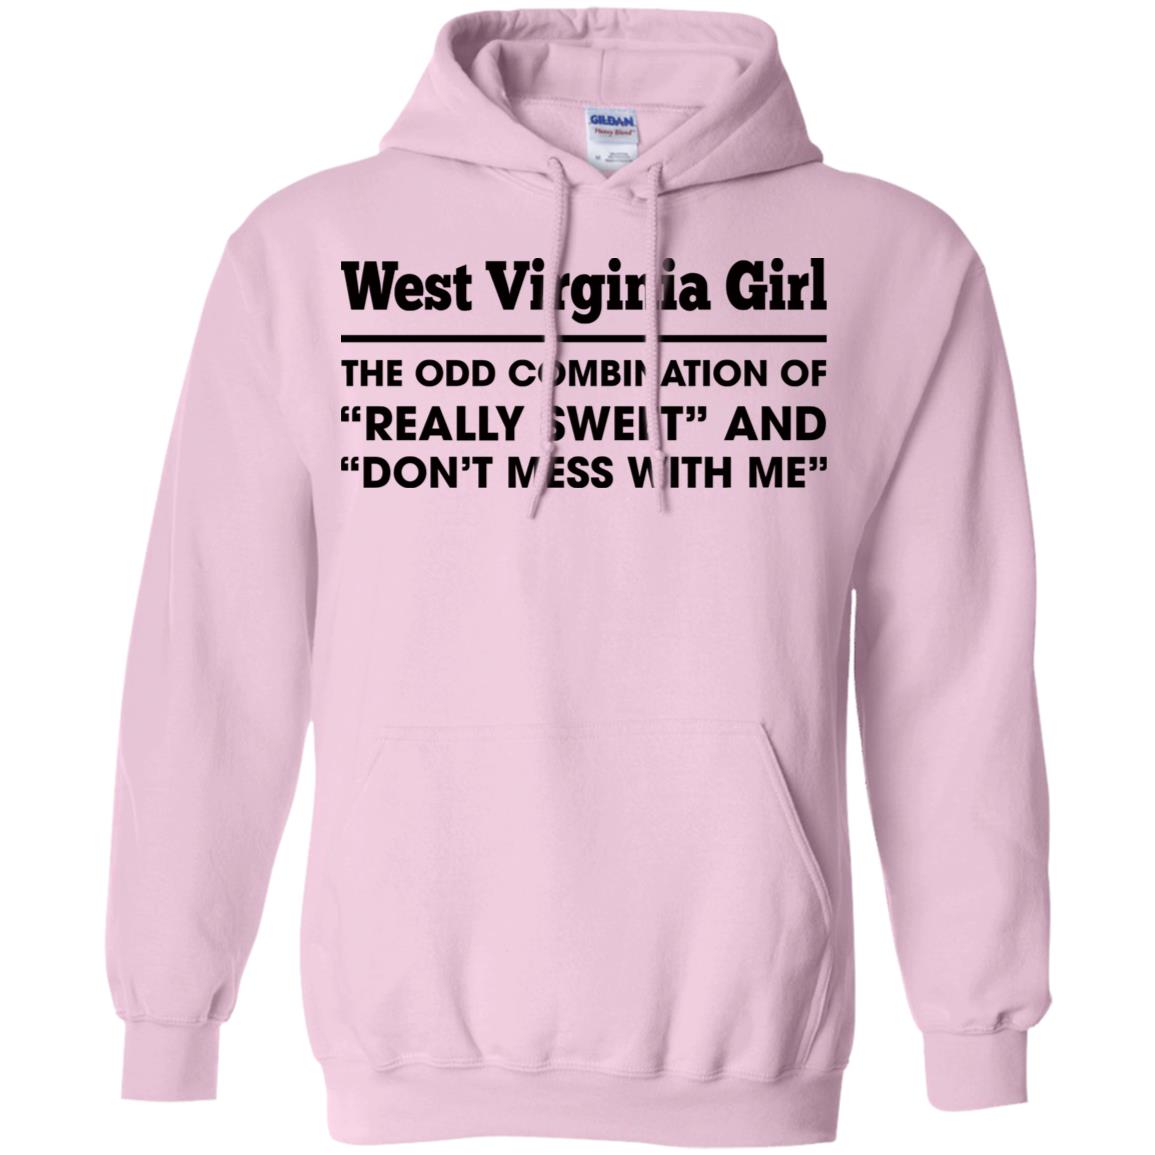 West Virginia Girl Really Sweet And Don't Mess With Me T Shirt - T-shirt Teezalo